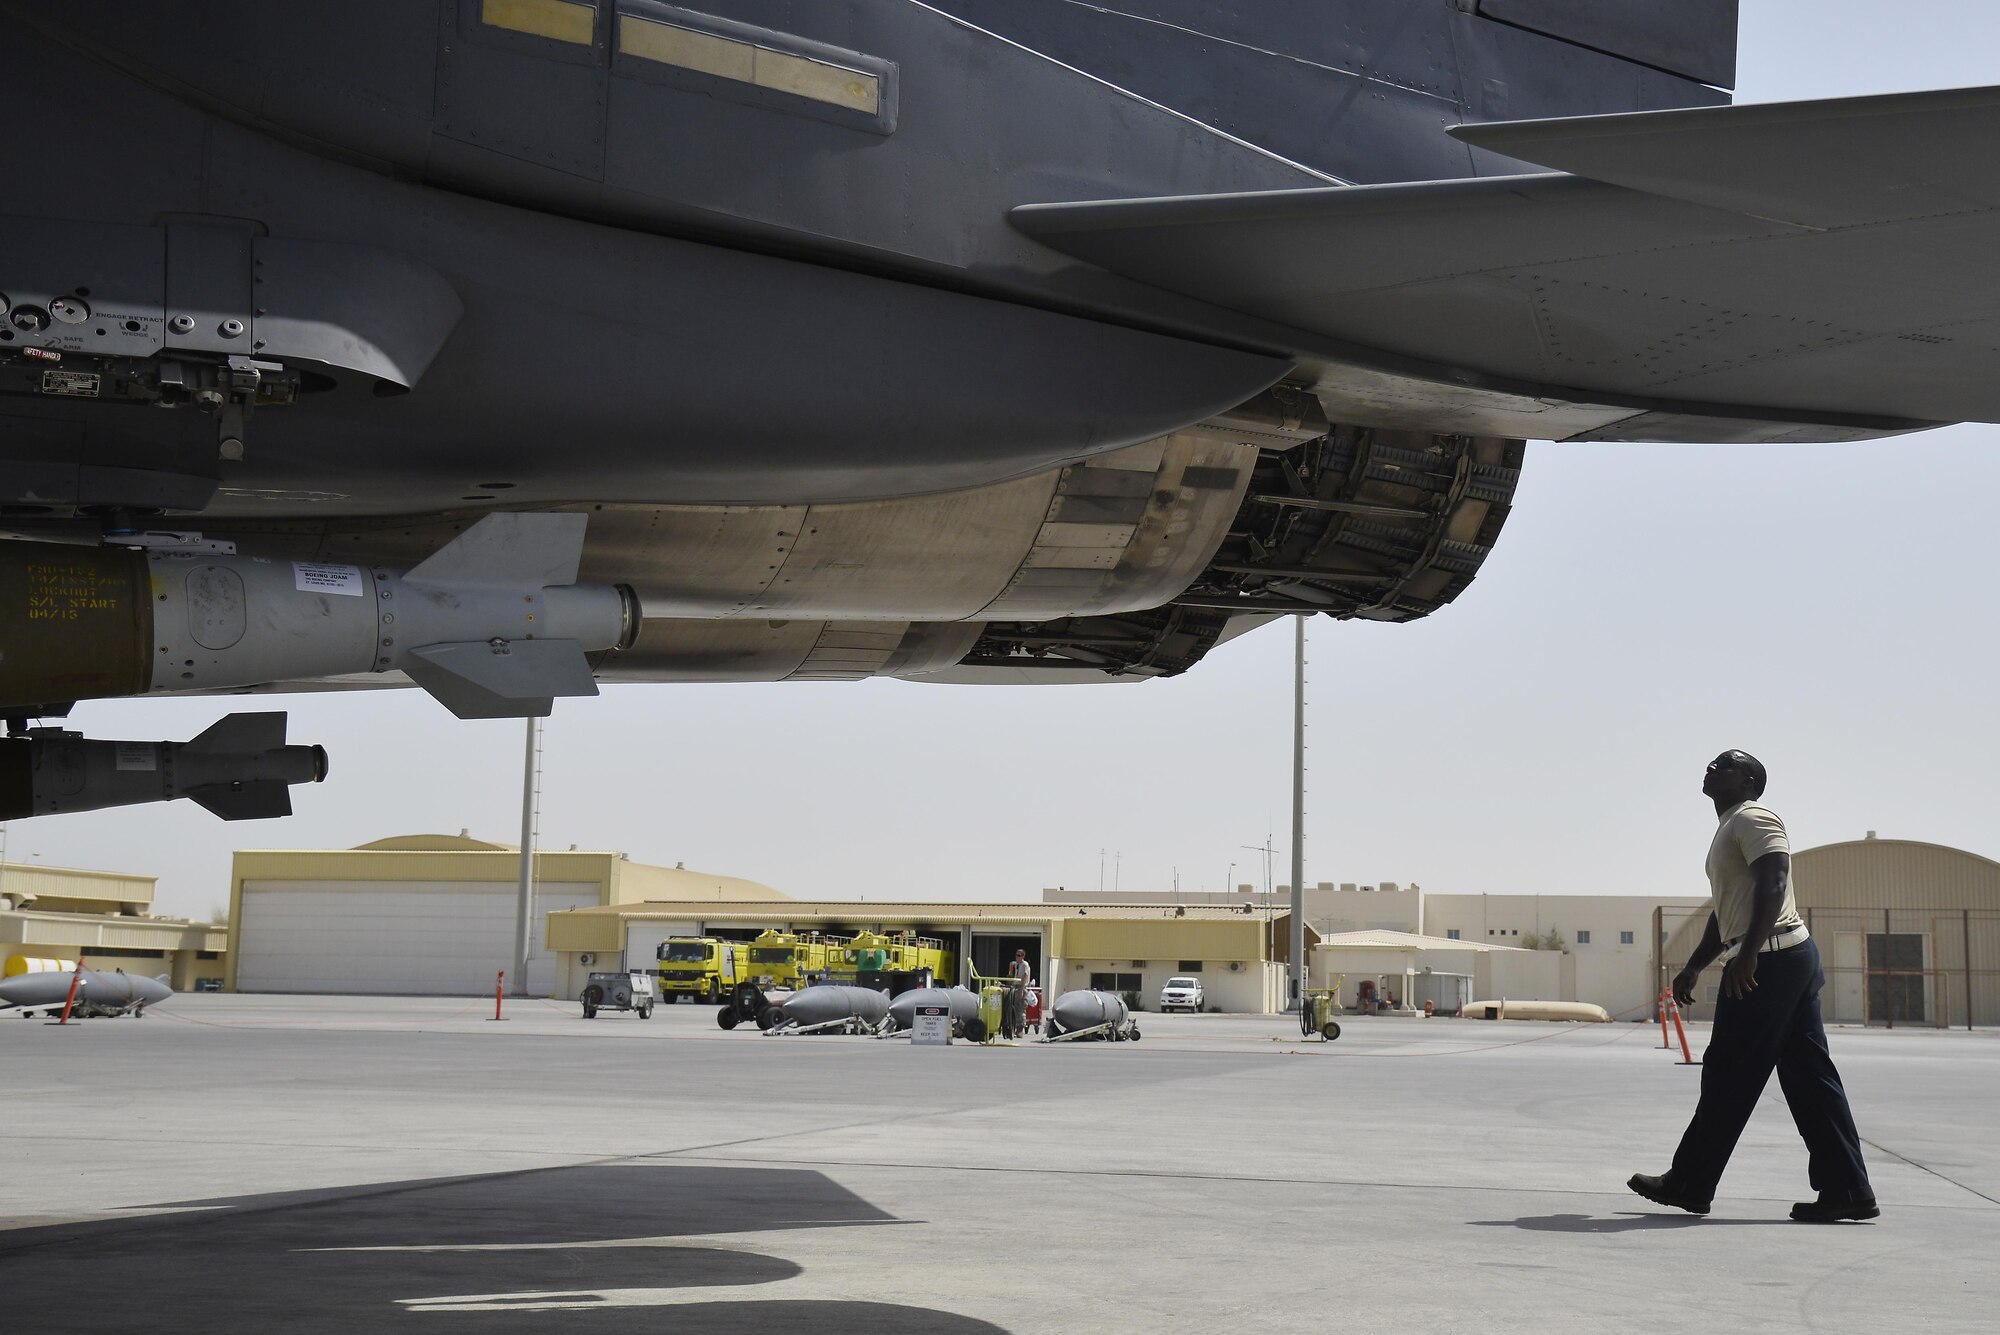 Staff Sgt. Oren performs a visual inspection of an F-15E Strike Eagle exhaust during a pre-launch inspection at an undisclosed location in Southwest Asia May 31, 2015. Sgt. Oren is a dedicated crew chief assigned to the 380th Expeditionary Aircraft Maintenance Squadron. (U.S. Air Force photo/Tech. Sgt. Christopher Boitz) 